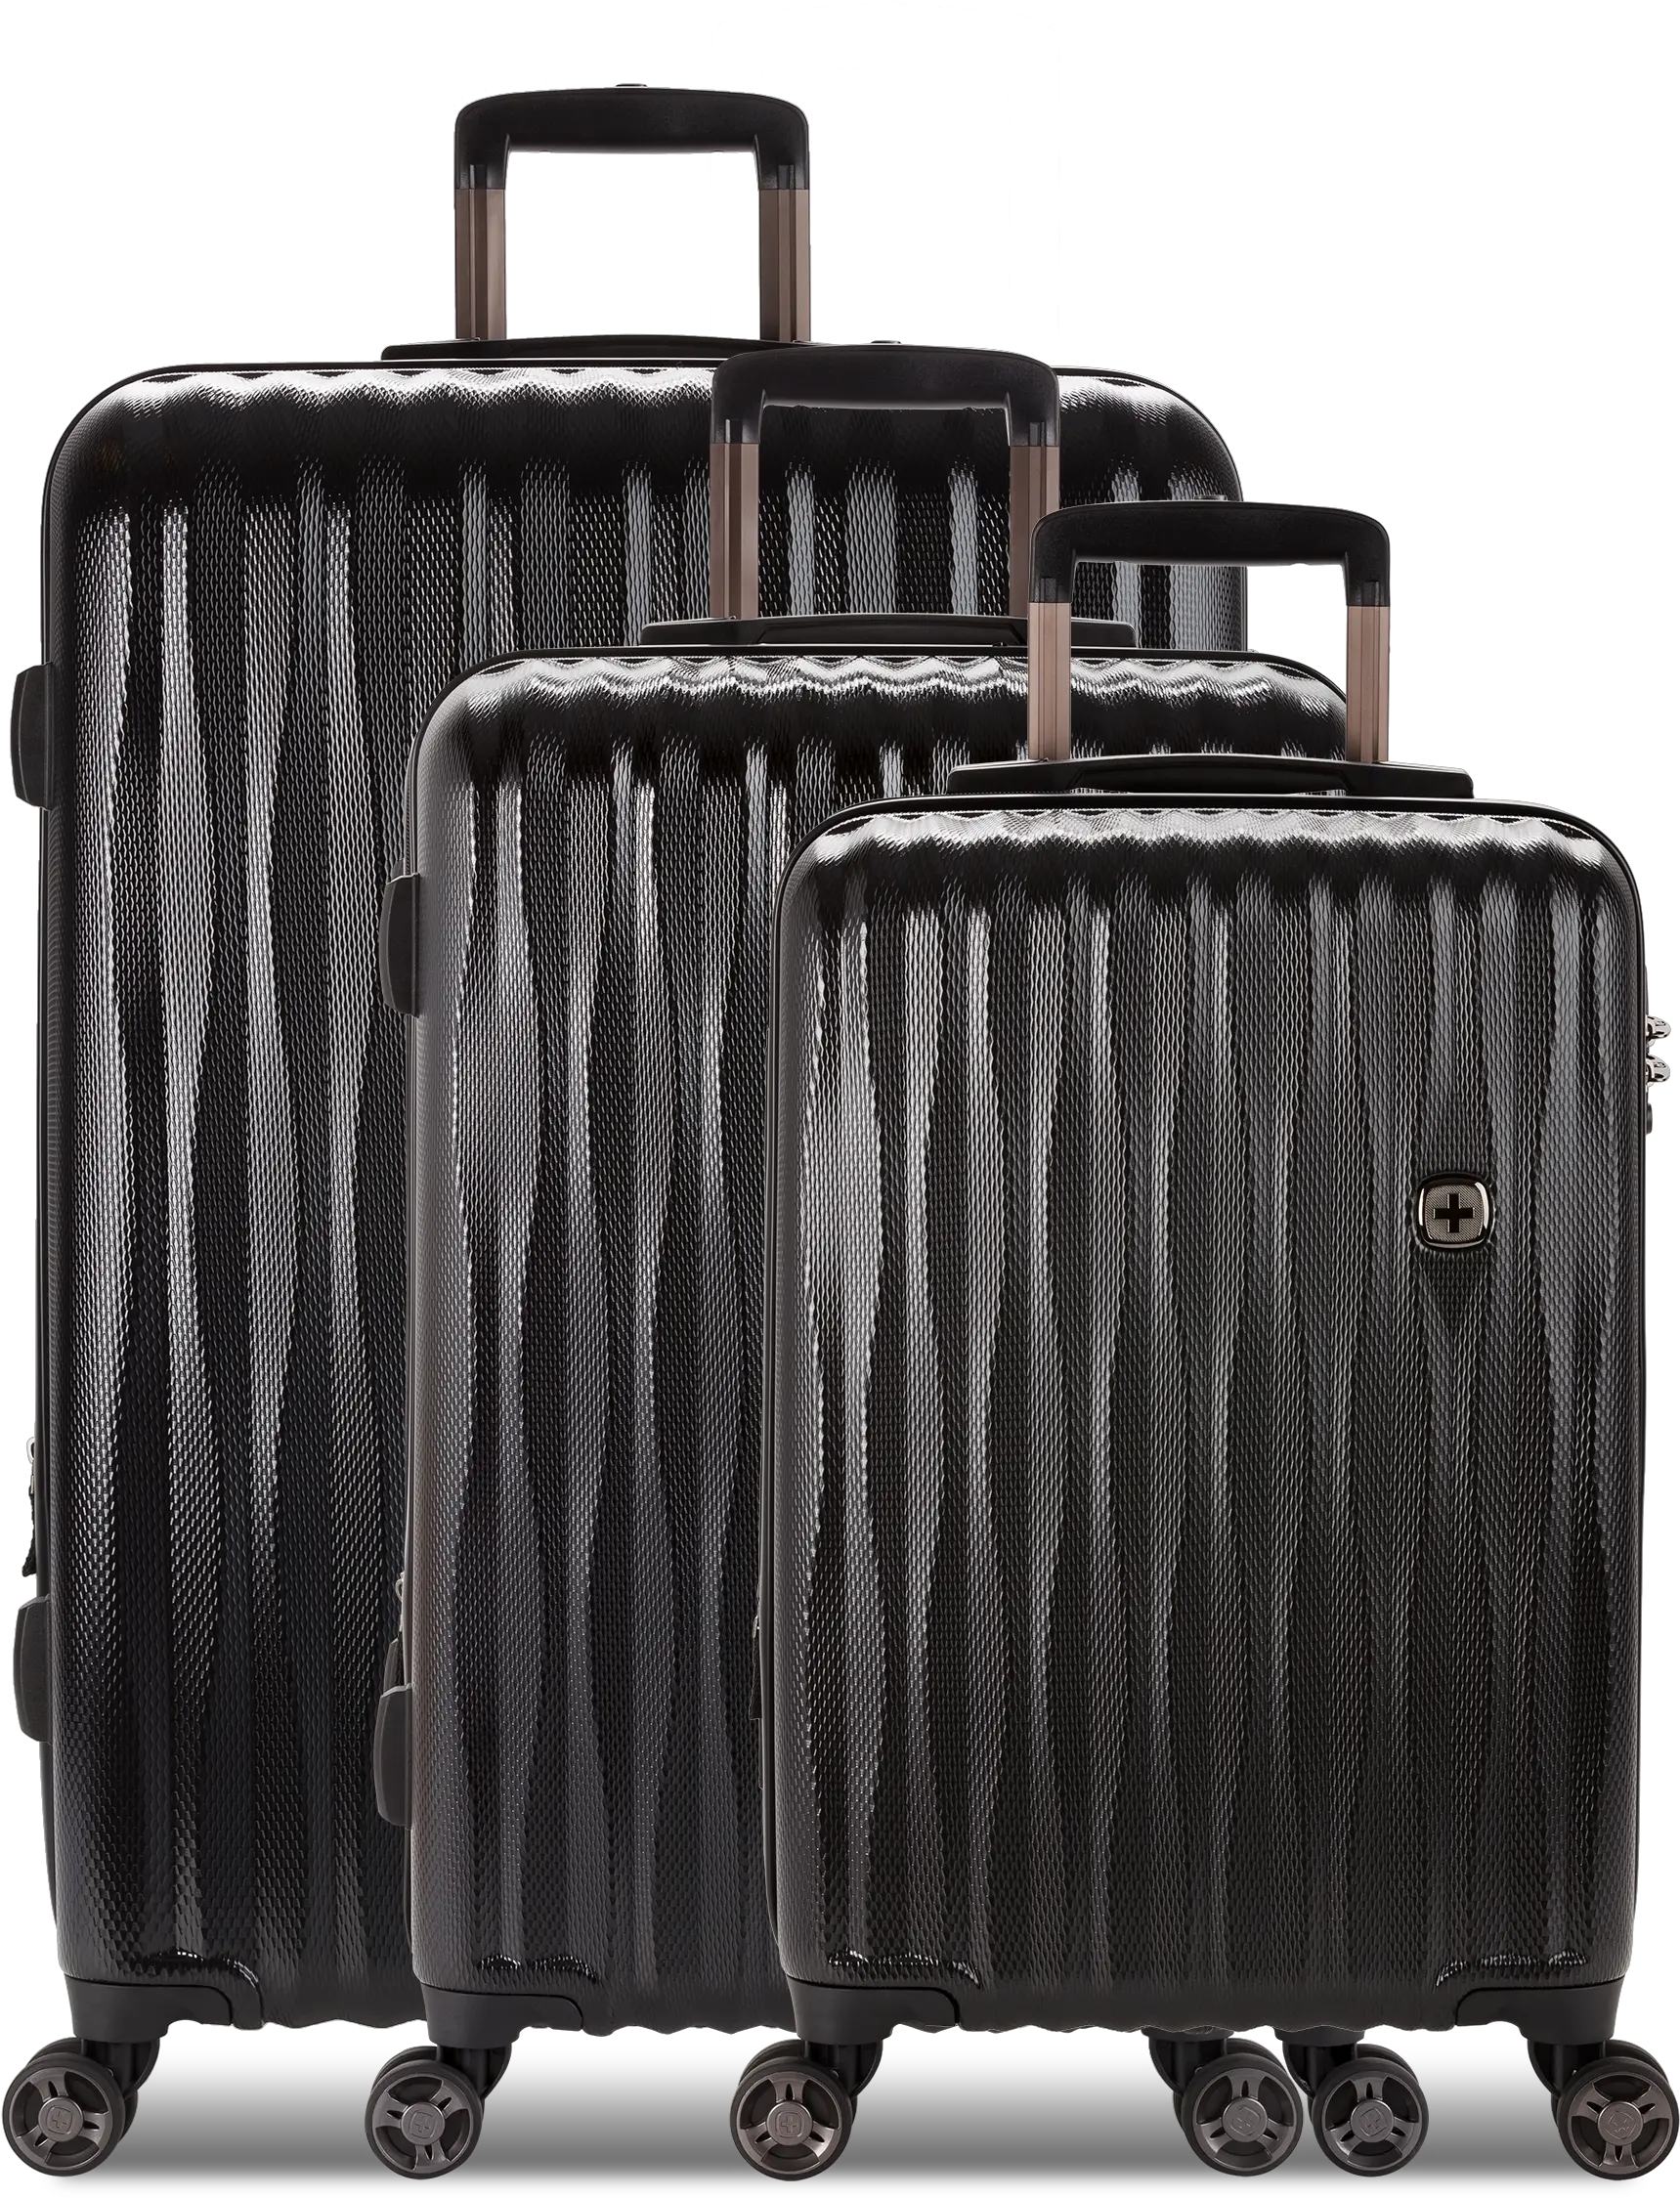 Swissgear Travel Luggage And Bags Swiss Gear Travel Bags Png Airport Luggage Polycarbonate Collection Icon Spinner